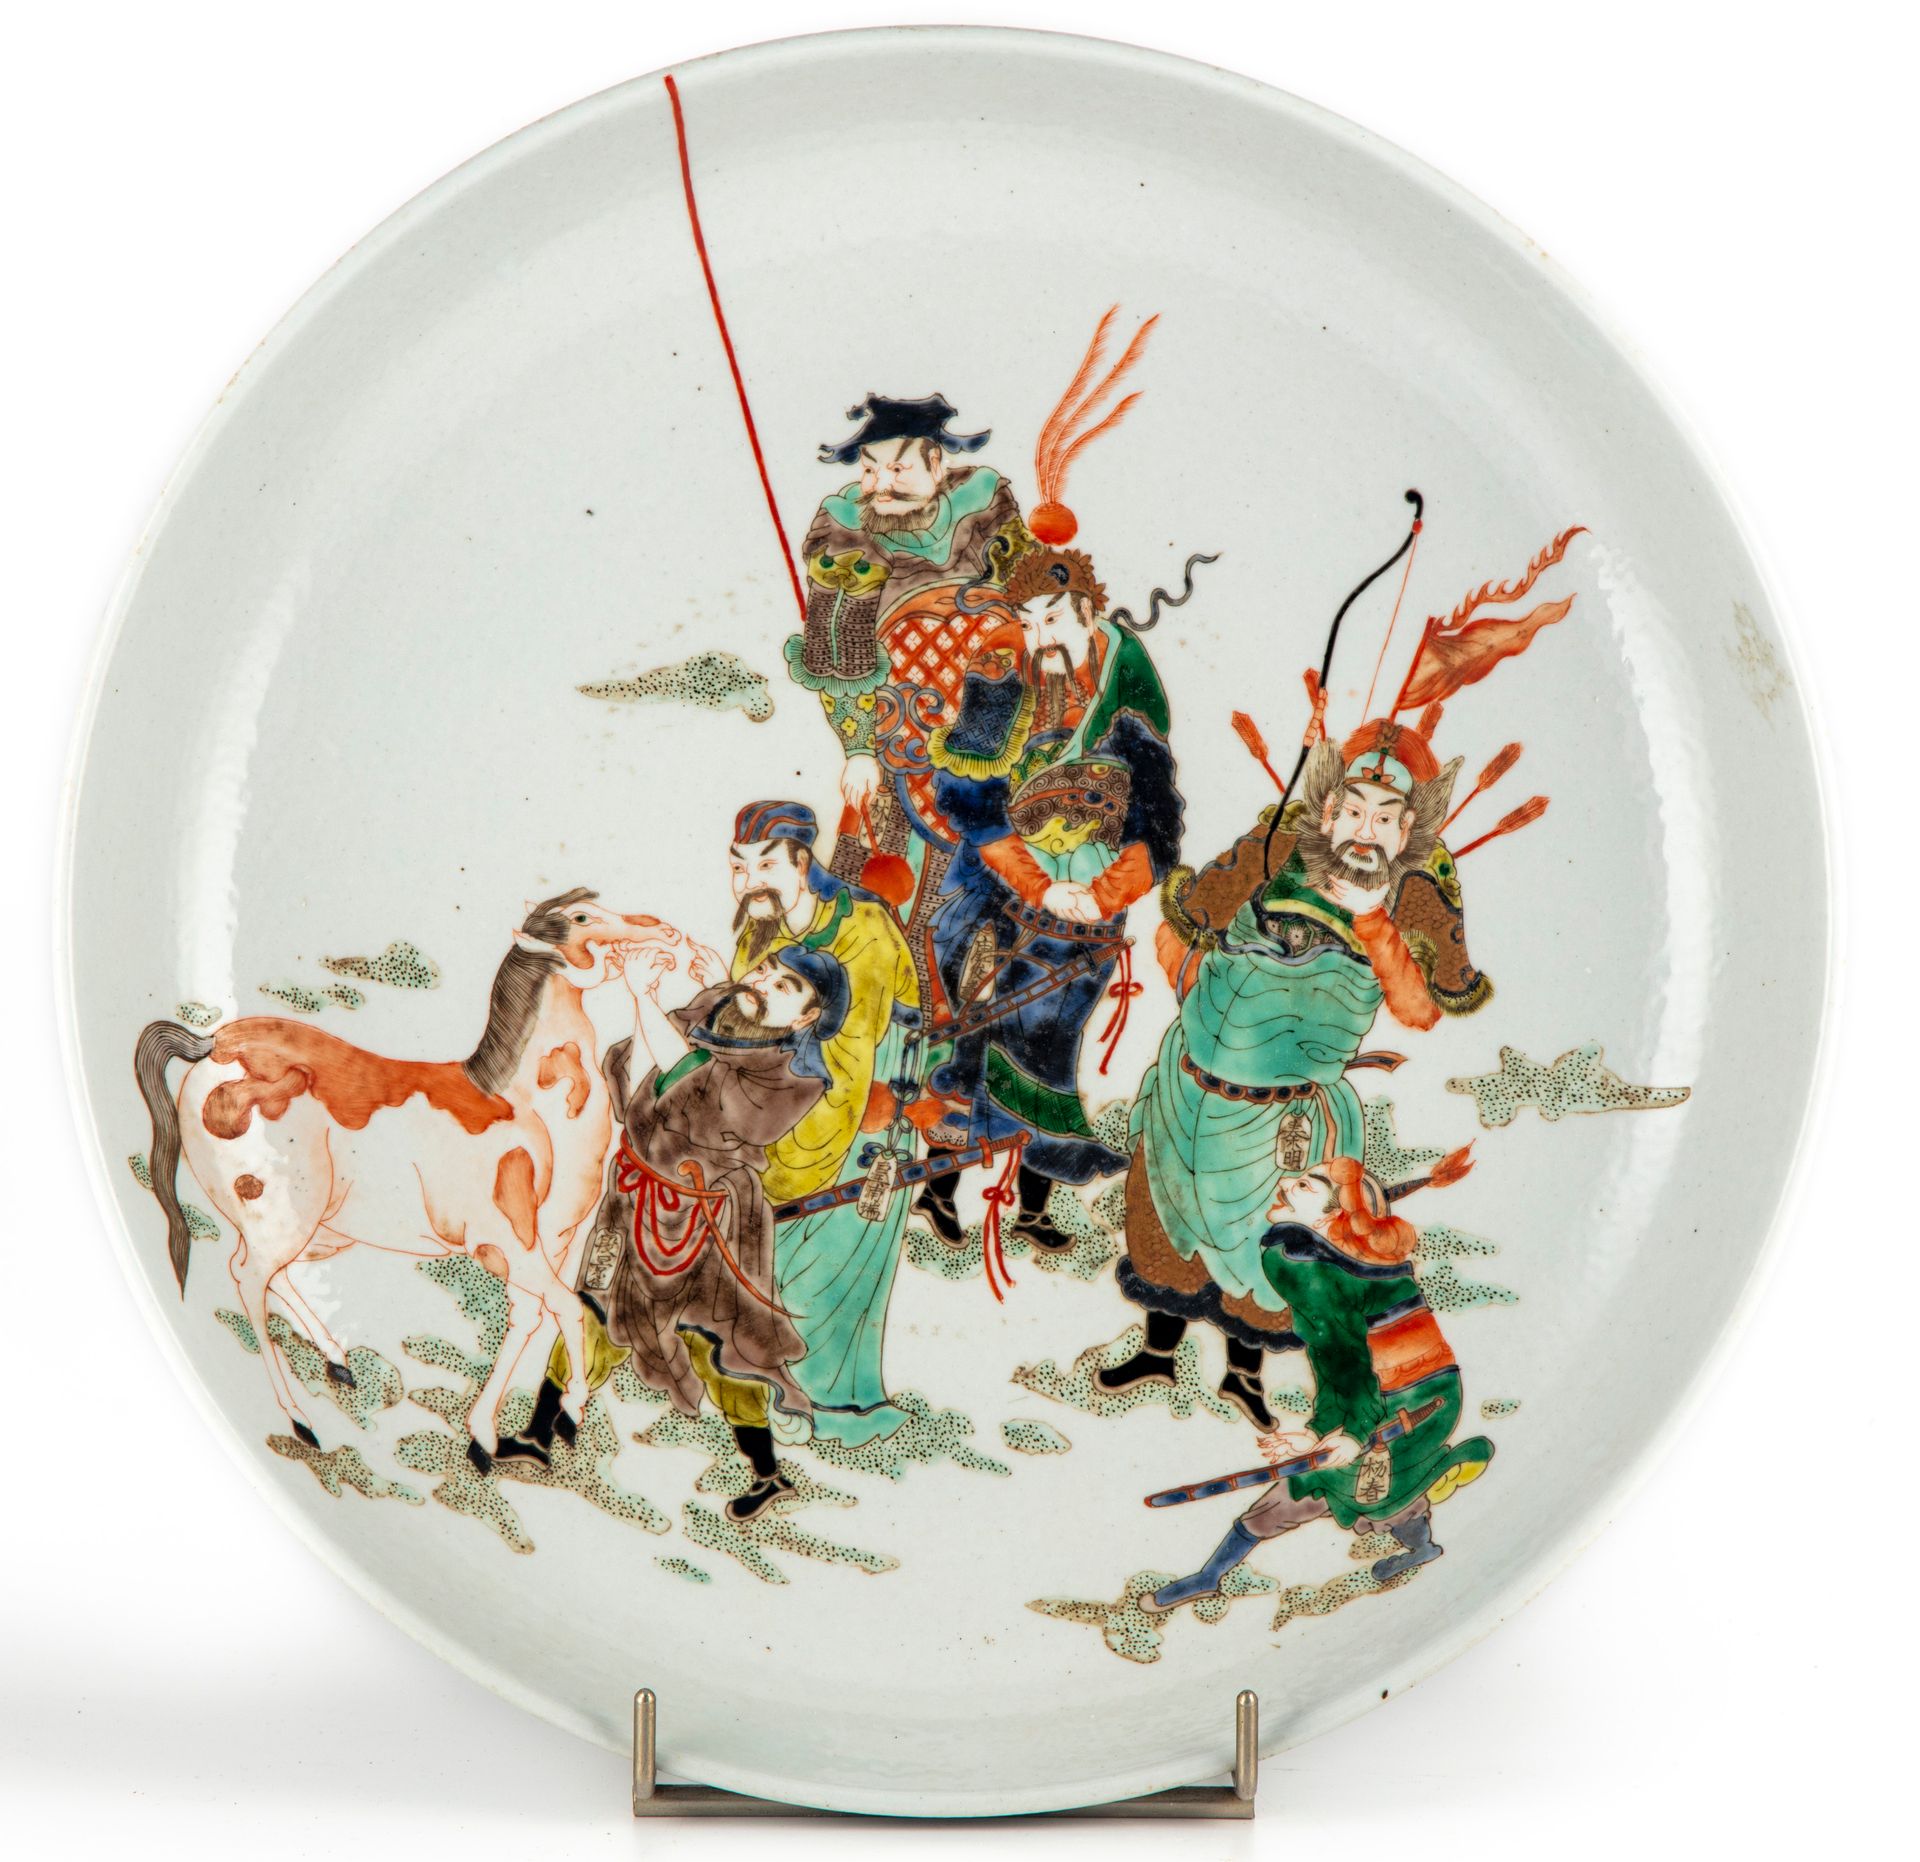 CHINE CHINA - 20th century

A round polychrome enamelled porcelain dish with pol&hellip;